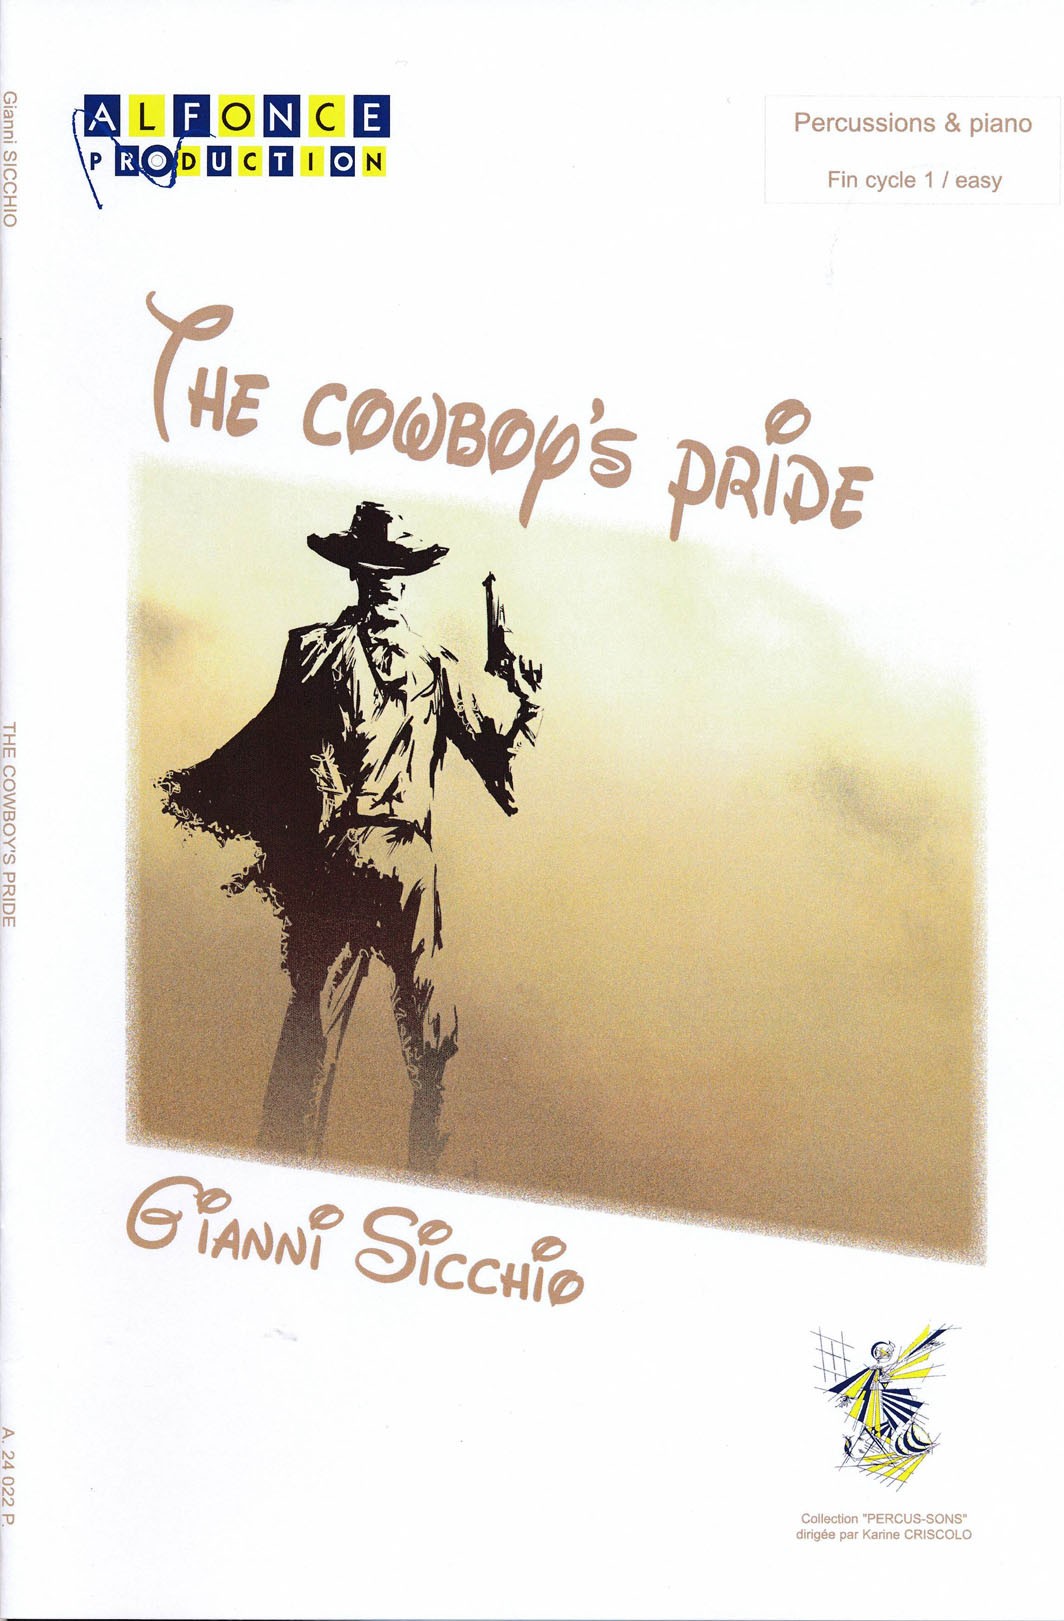 The Cowboy's Pride by Gianni Sicchino